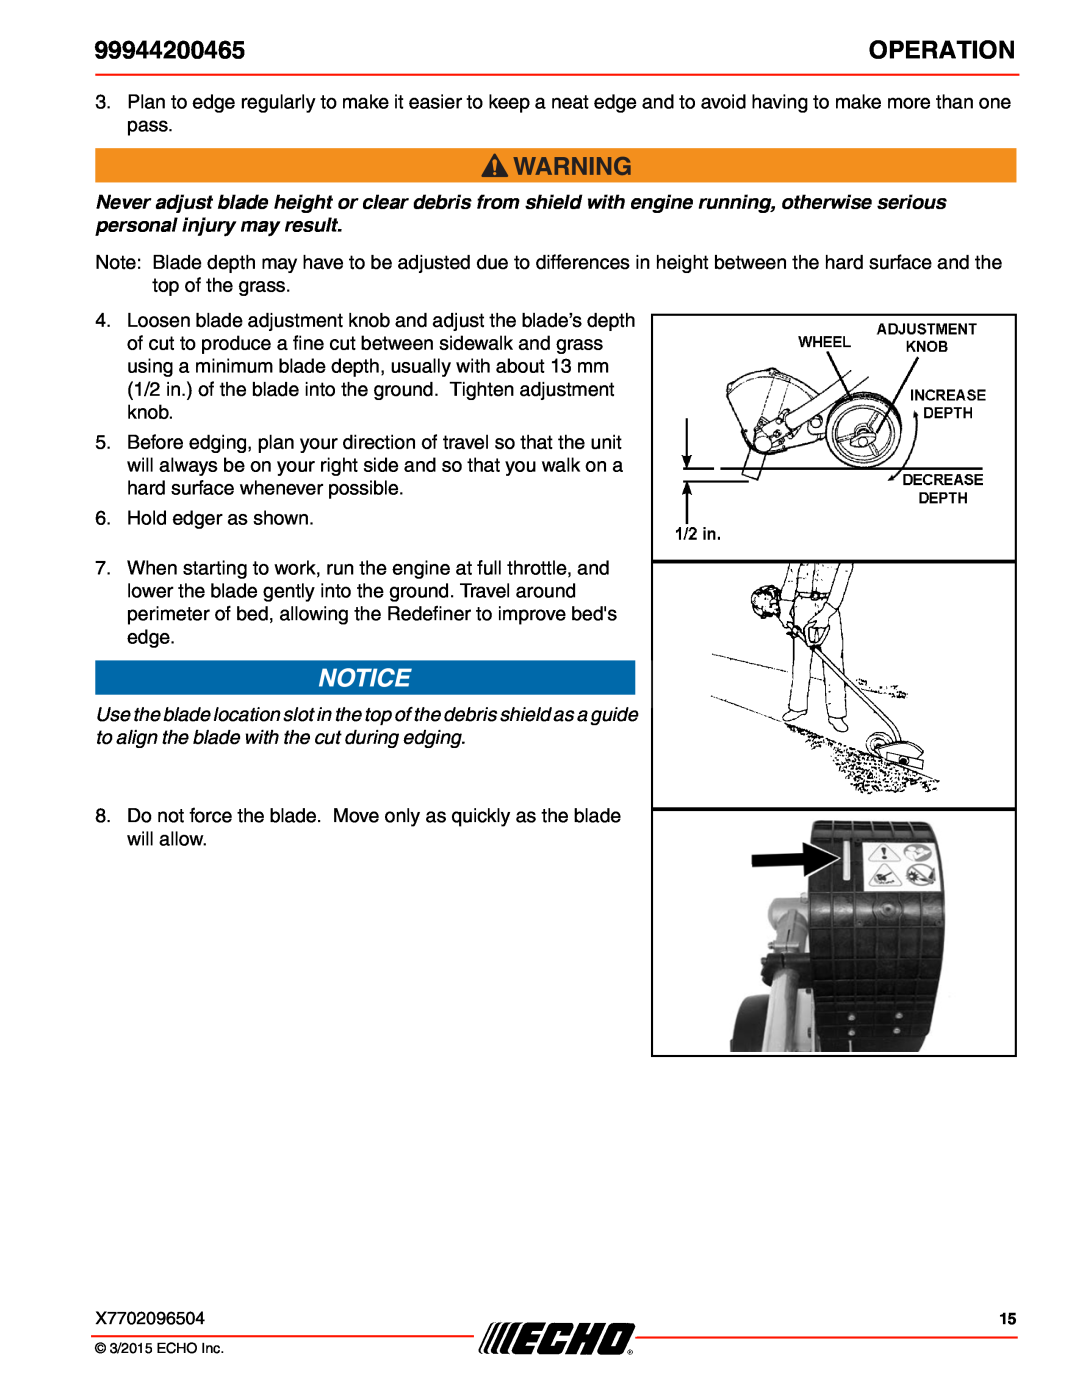 Echo 99944200465 specifications Operation, Hold edger as shown 